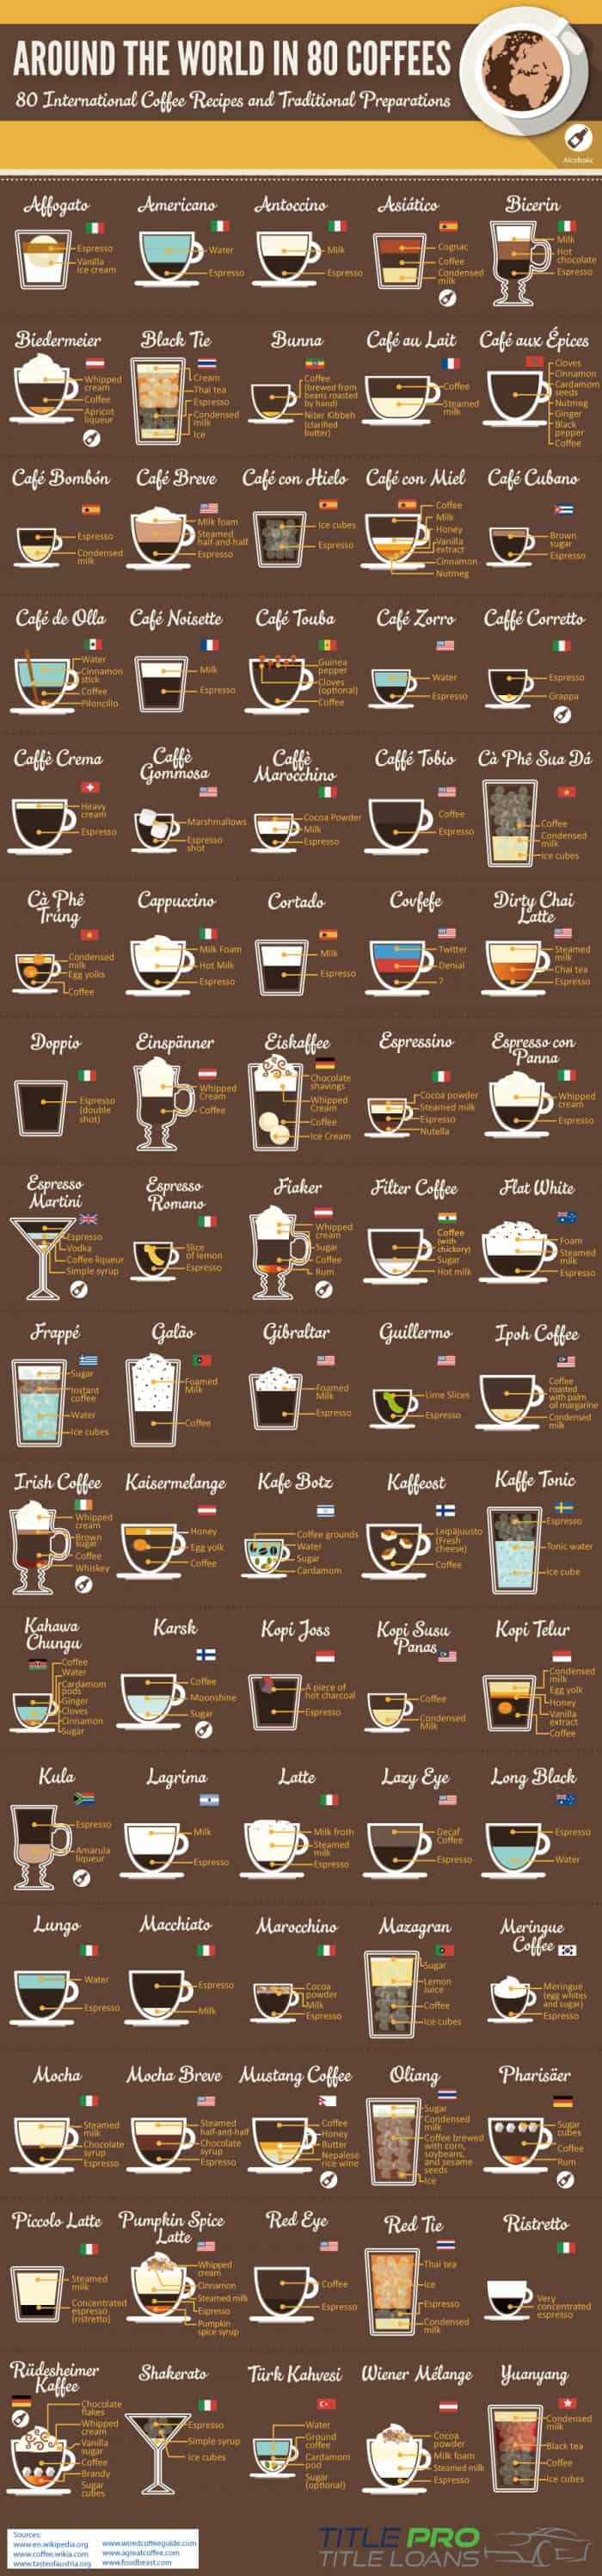 infographic of 80 types of coffee from around the world